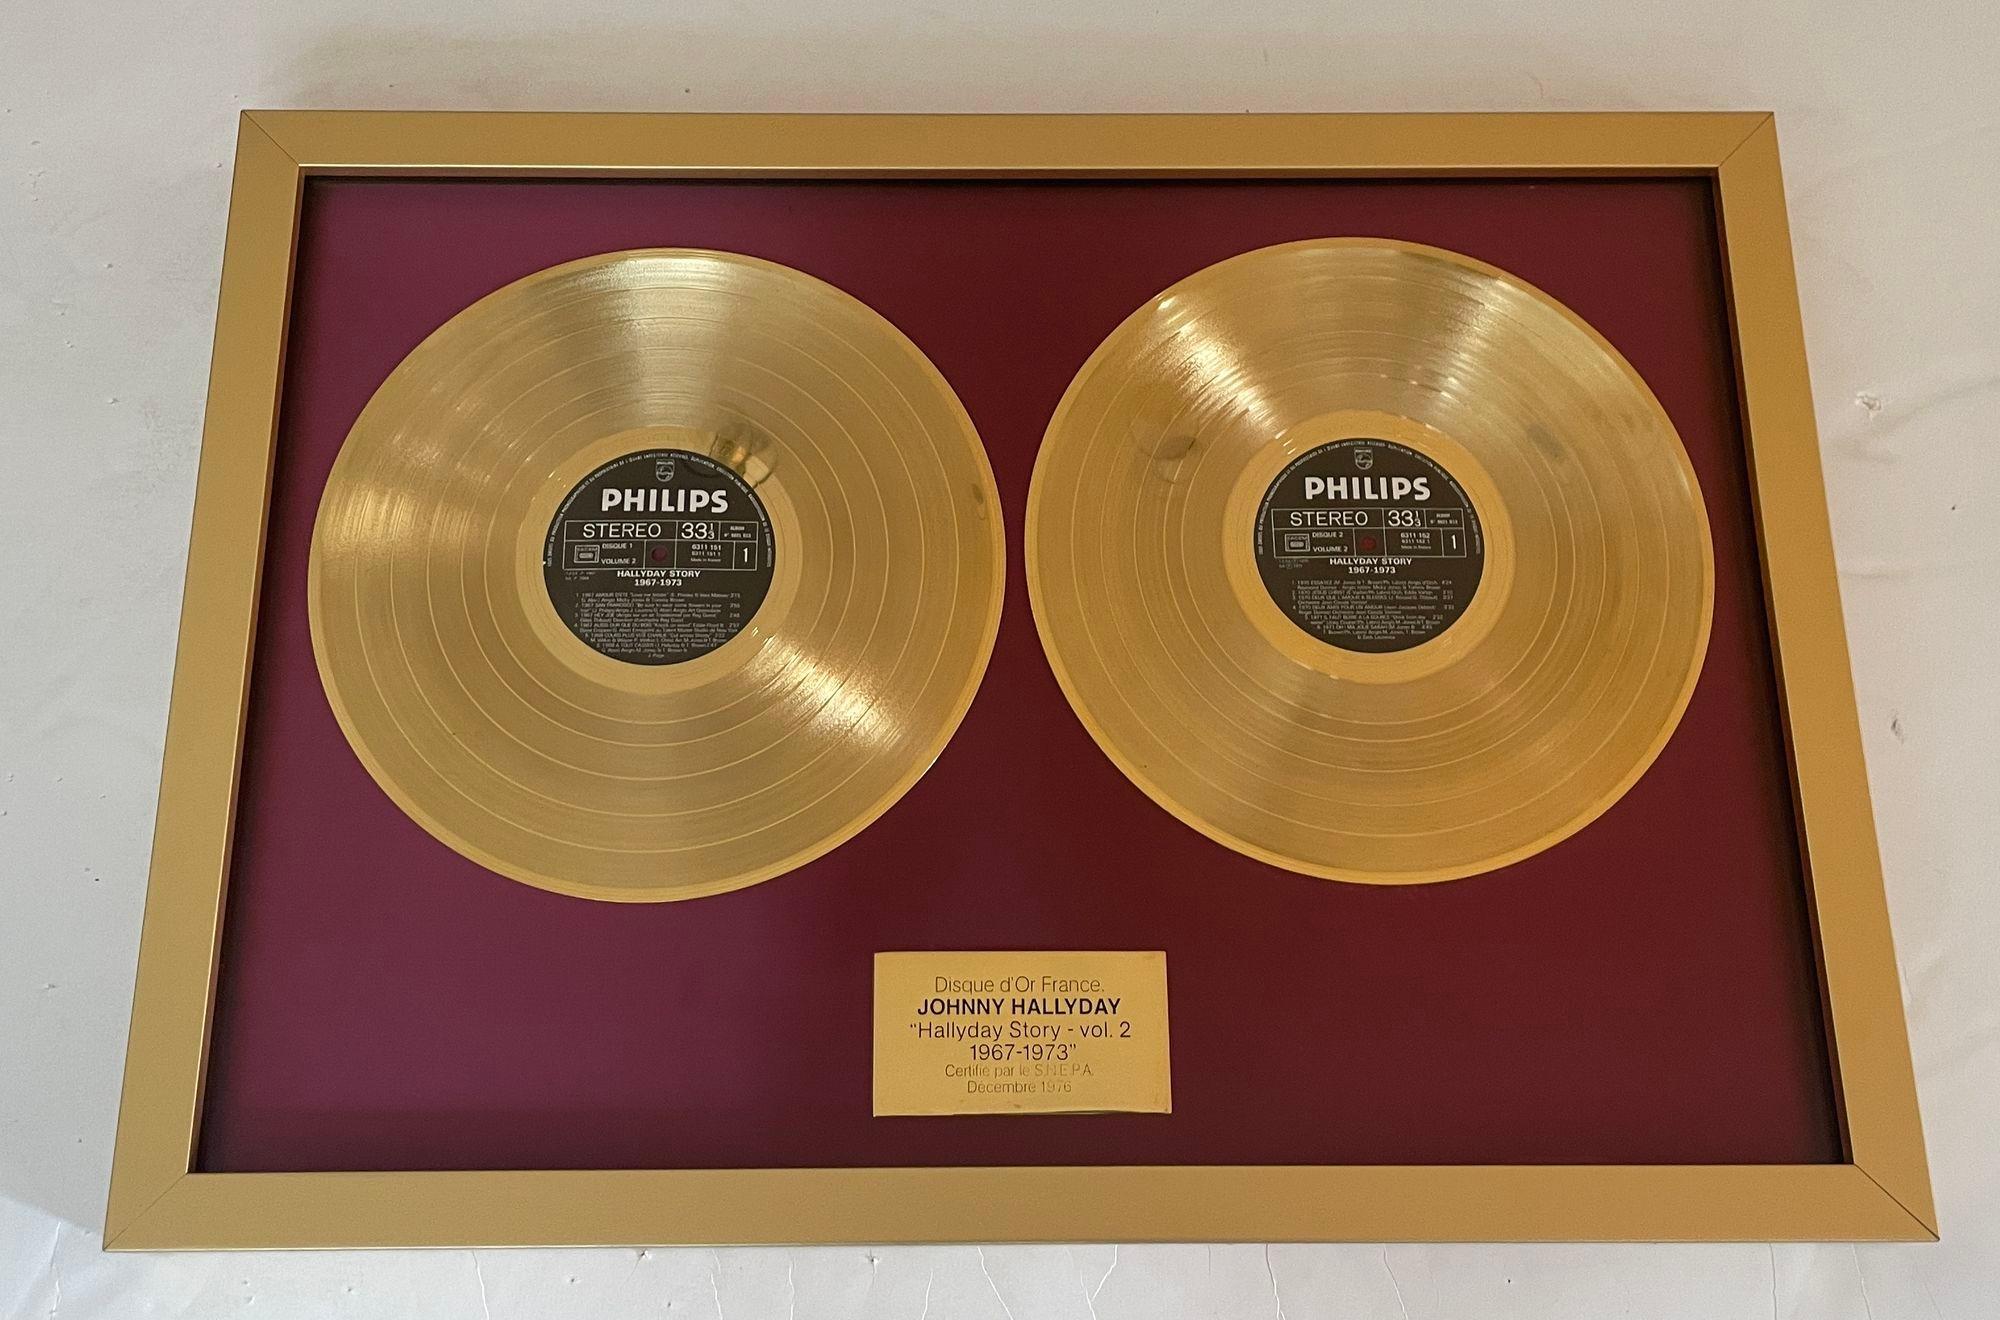 Gold Record Award - Official Disque d'Or France Johnny Hallyday 